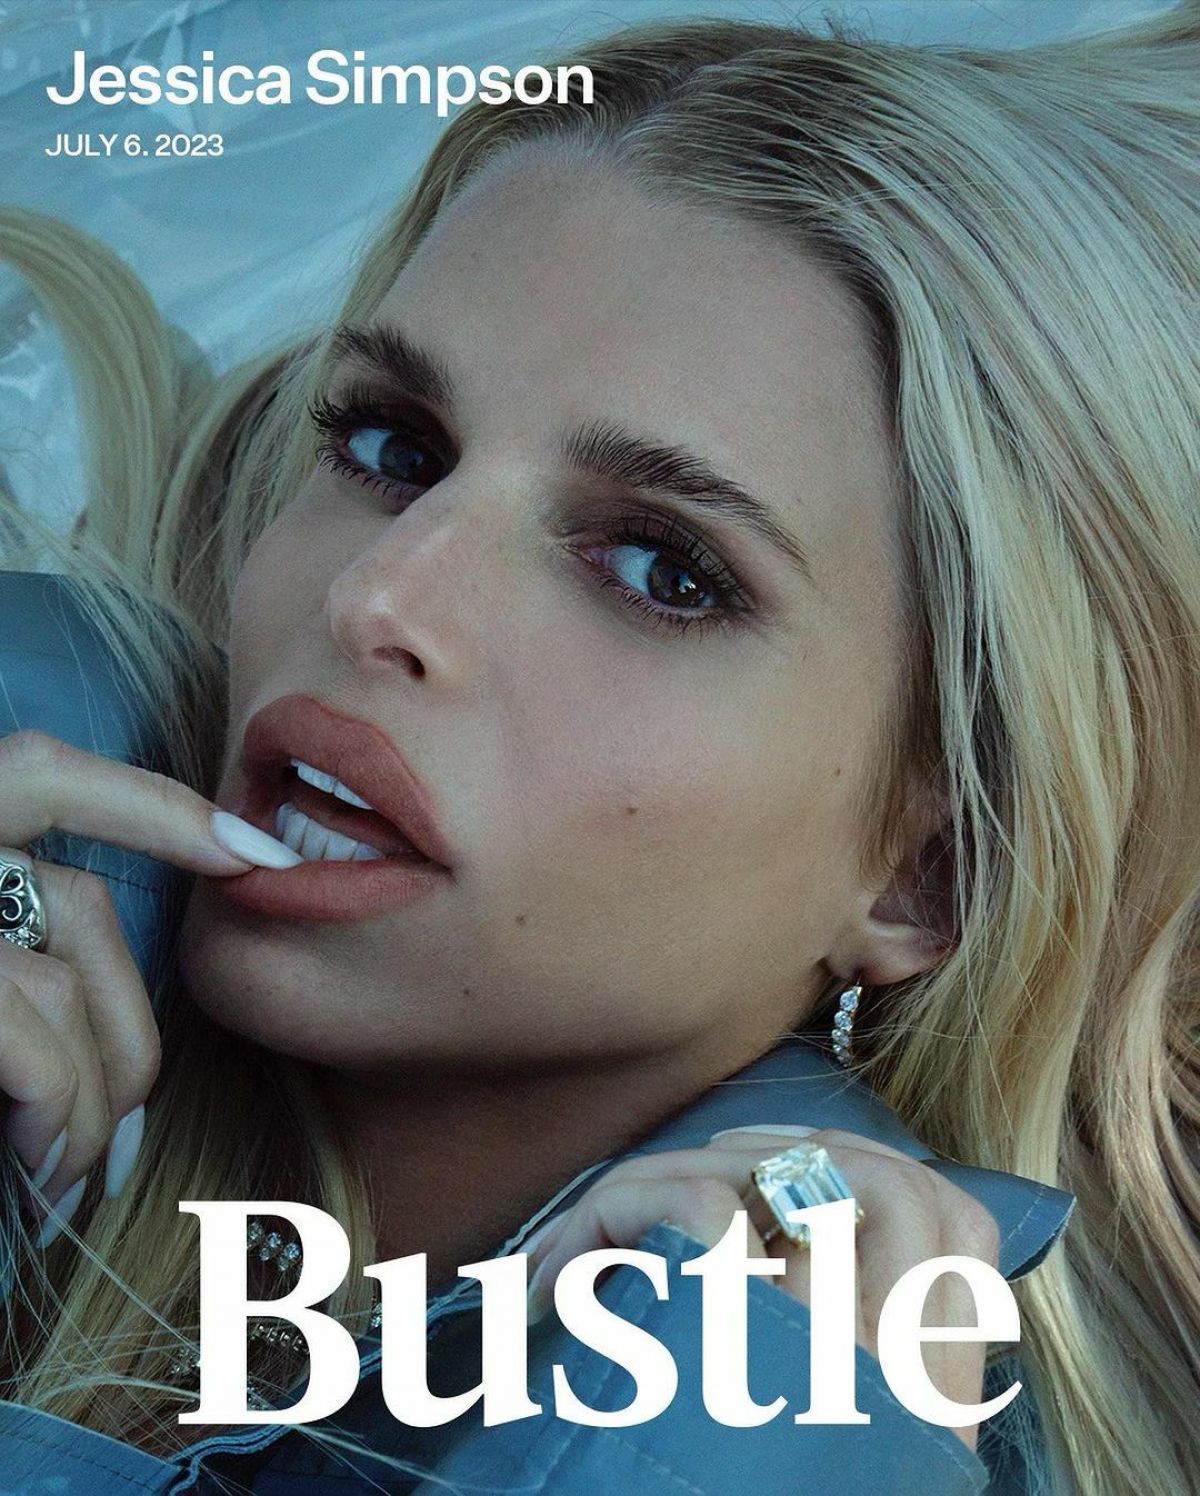 Jessica Simpson Shines on Bustle Magazine Cover: Flaunting Her Legs and Unmatched Style